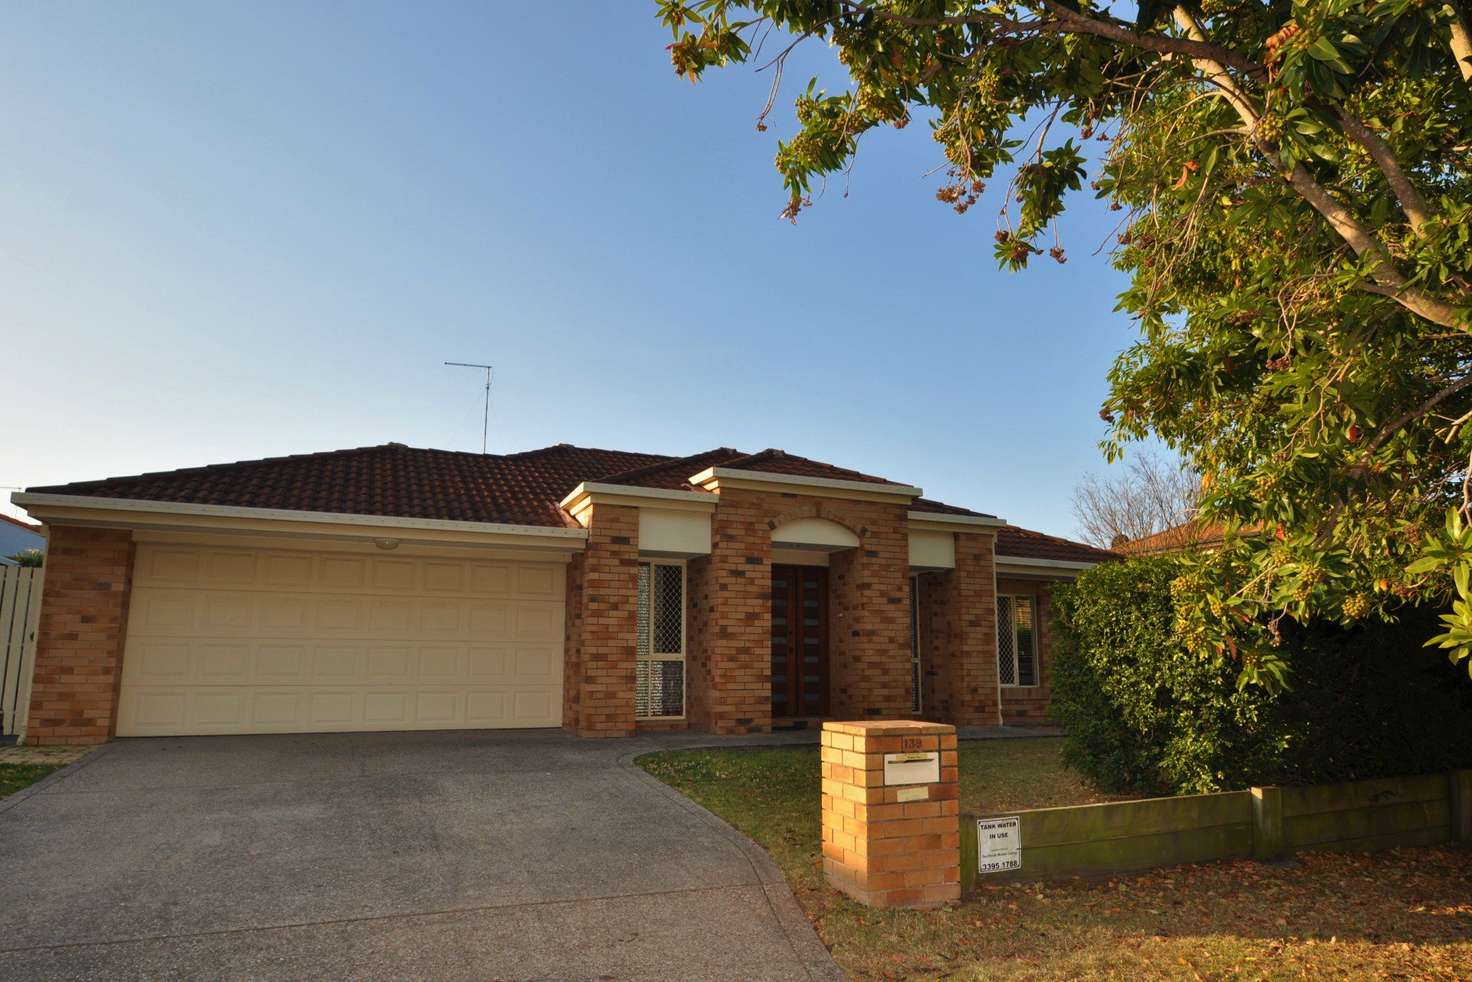 Main view of Homely house listing, 139 Petersen St, Wynnum QLD 4178